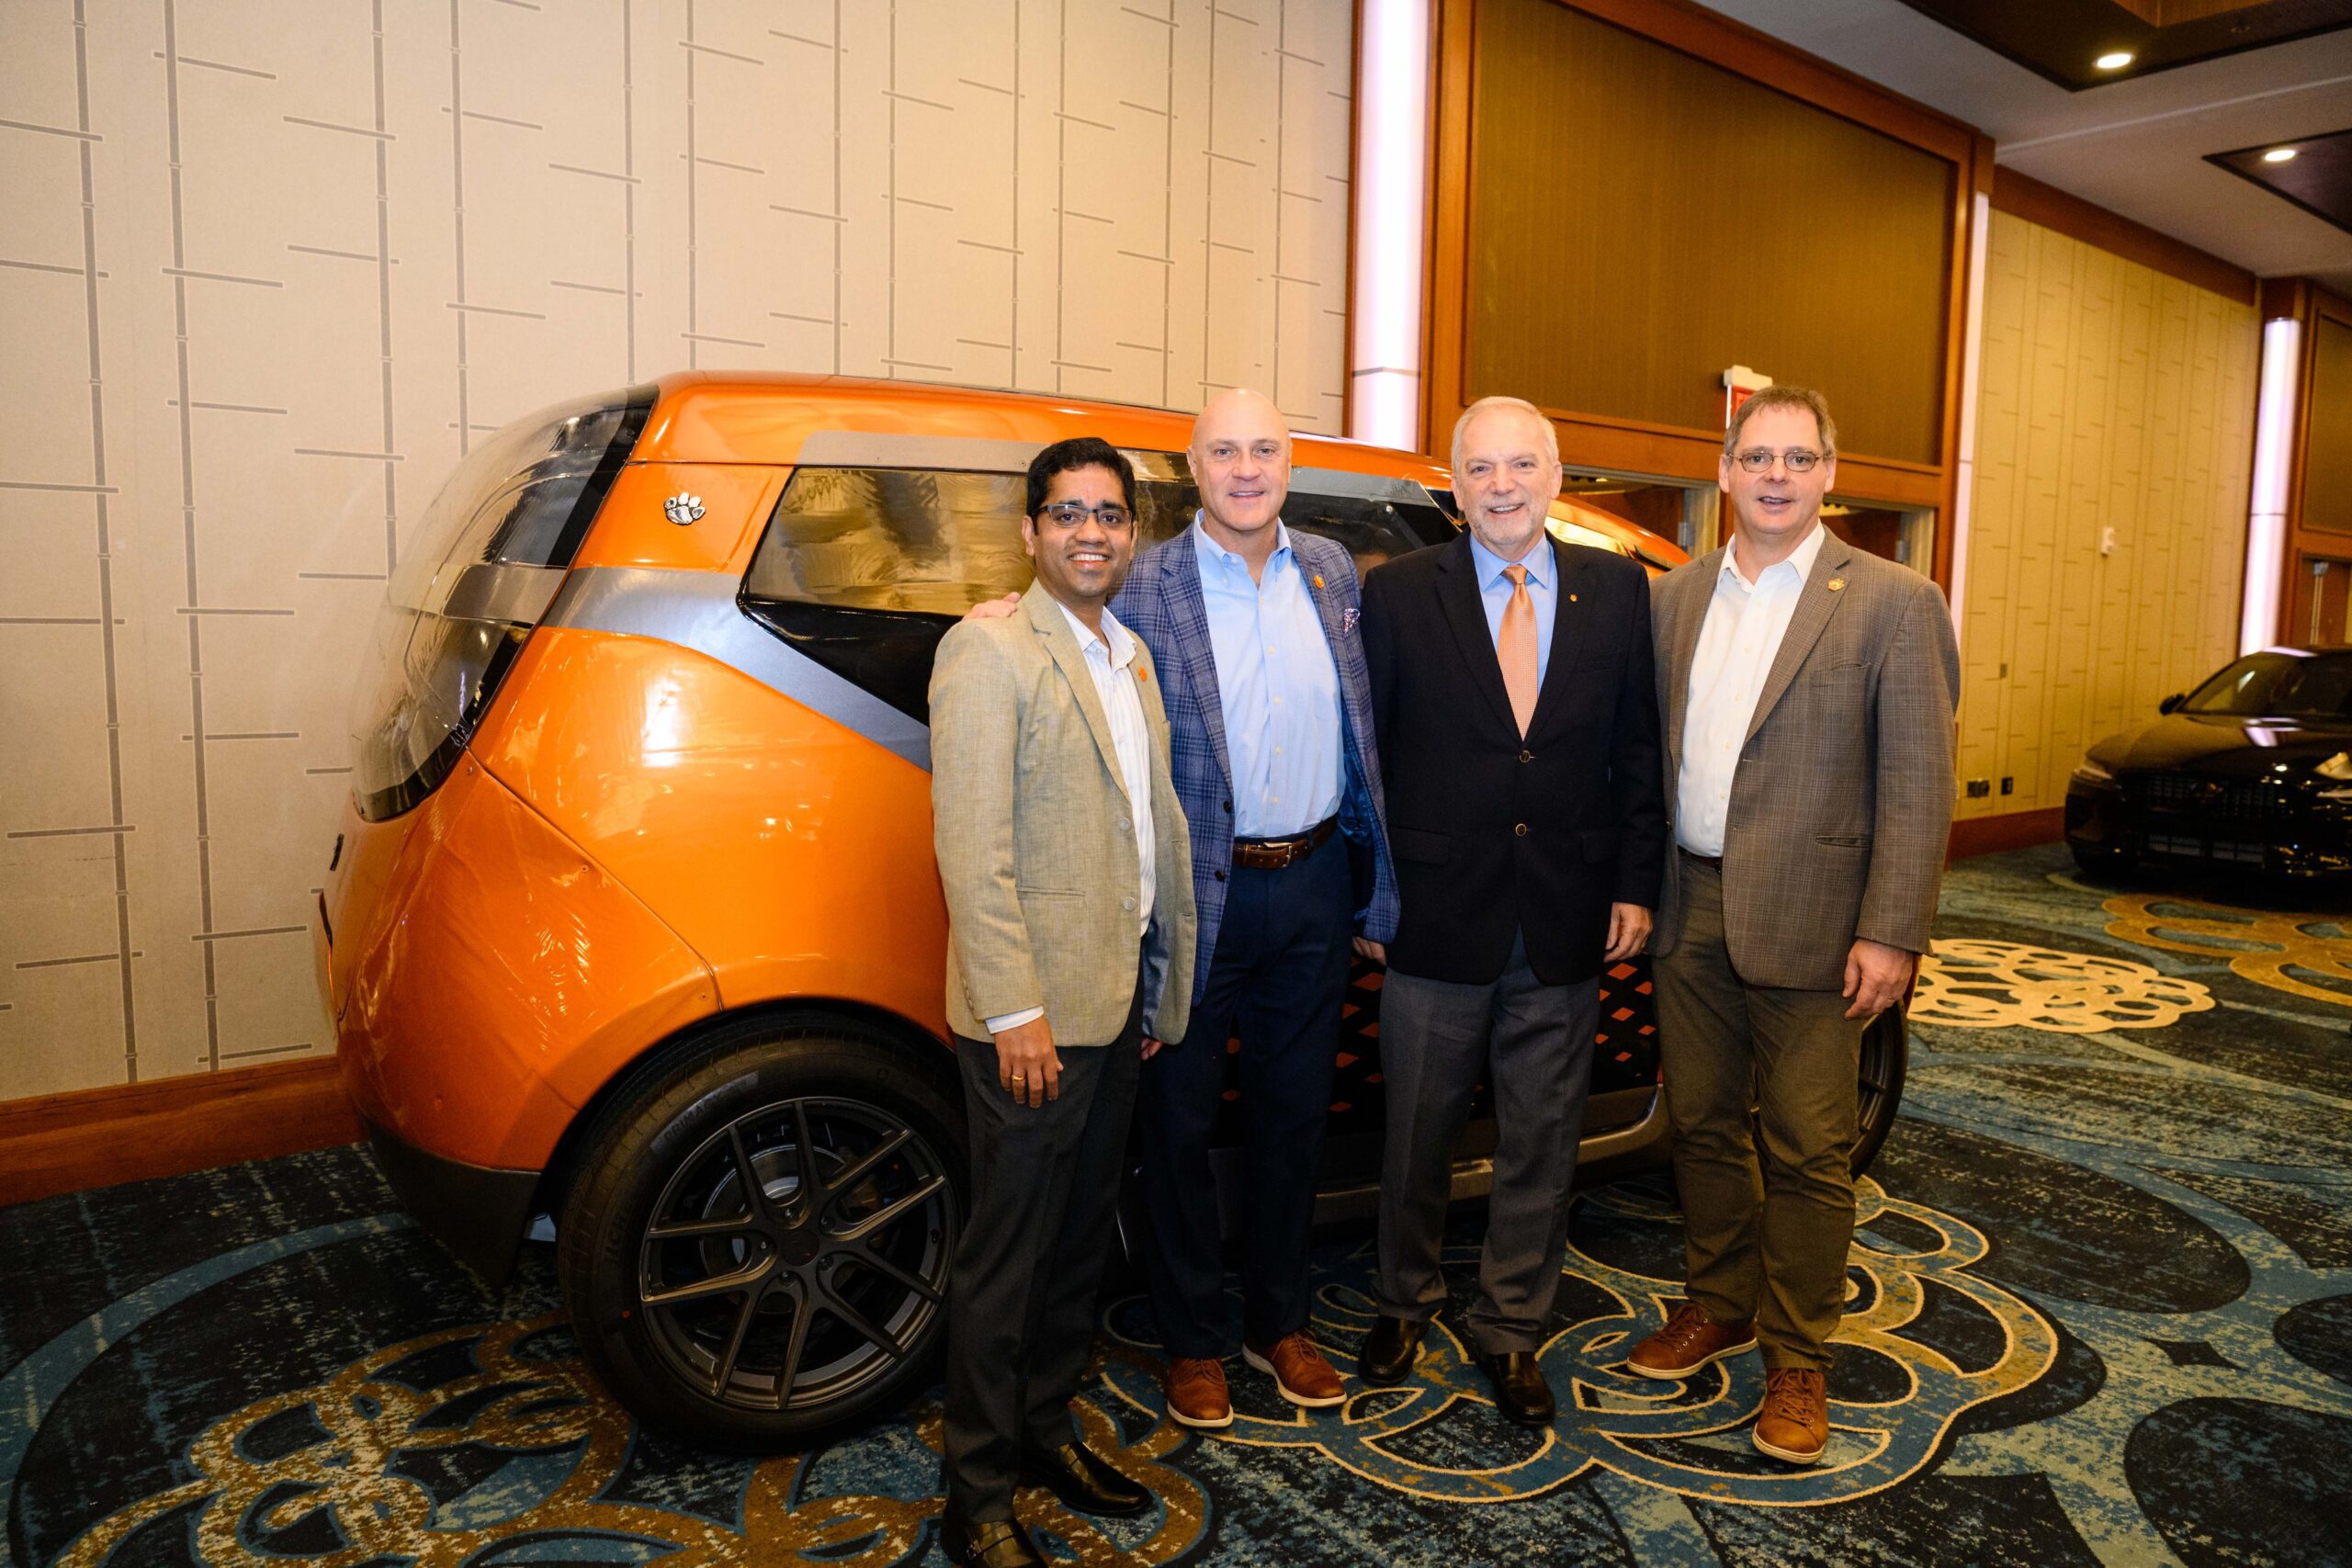 Four men wearing coats and collared shirts stand in front of an orange, futuristic car located inside an indoor, carpeted space, the S.C. Automotive Summit.